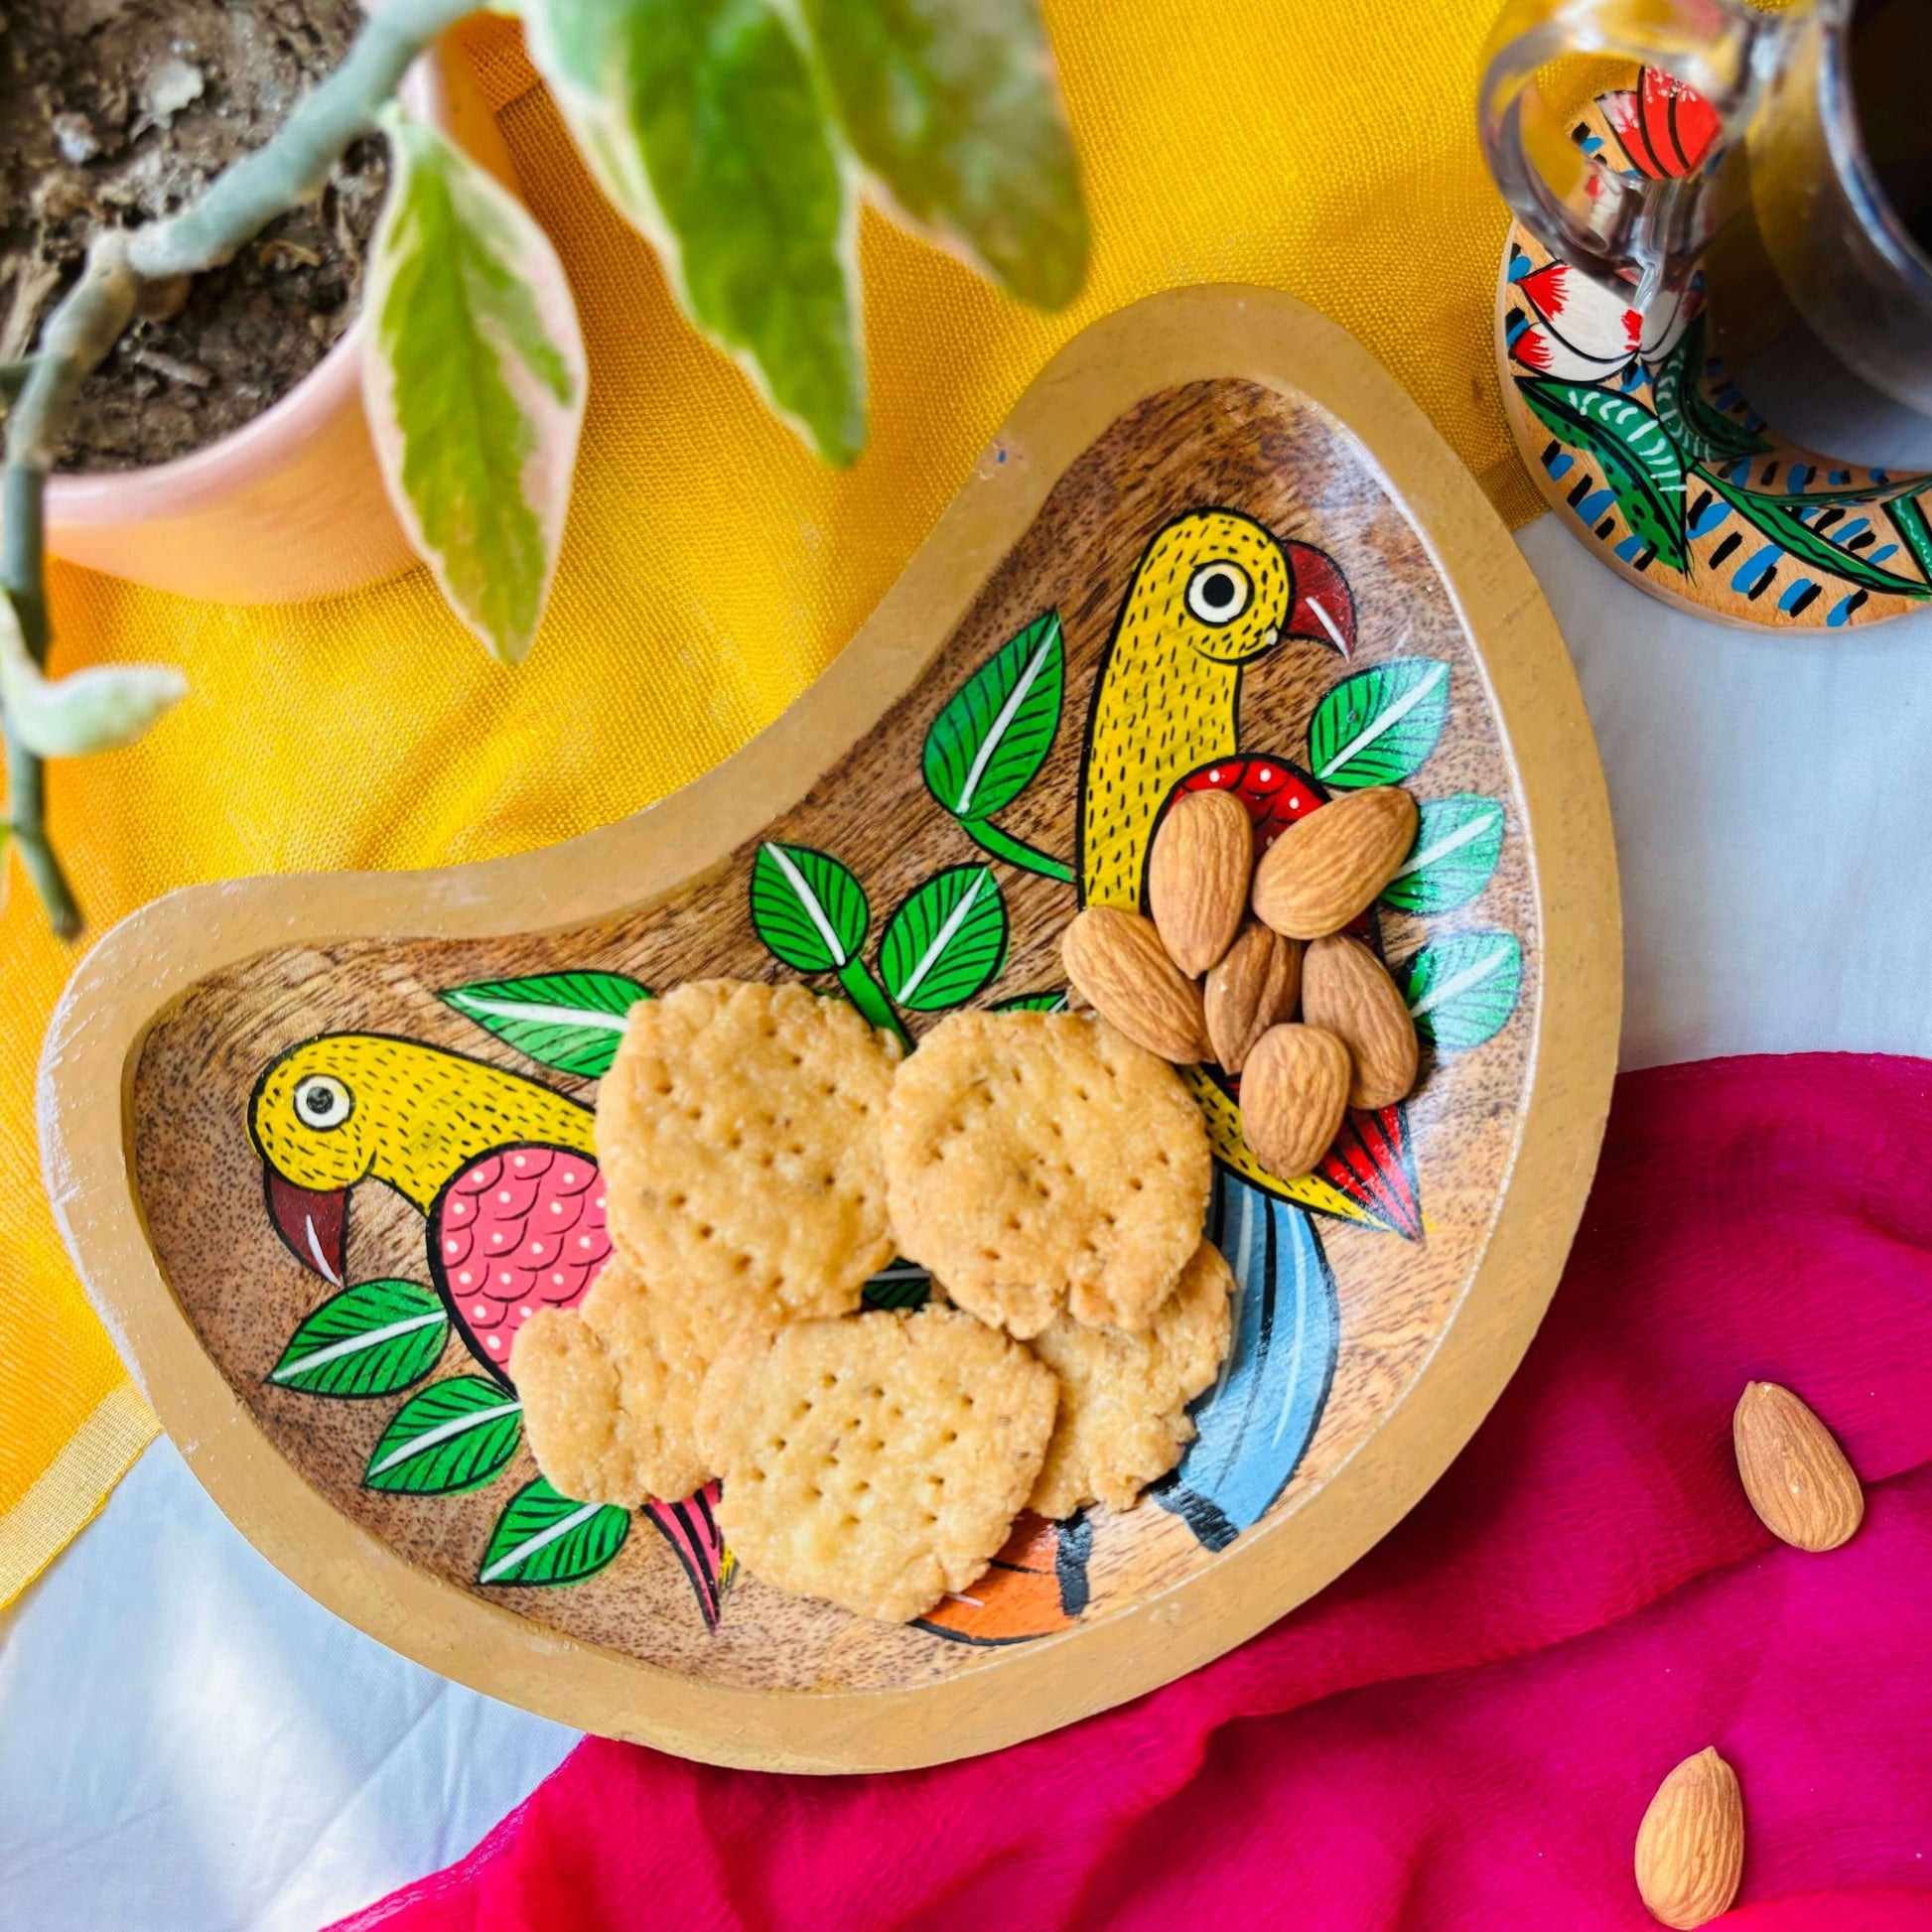 Biscuits and almonds are served in a handcrafted mango wood moon-shaped wooden tray for the kitchen or trinket tray, painted with a bird couple painting by generational Pattachitra artists.